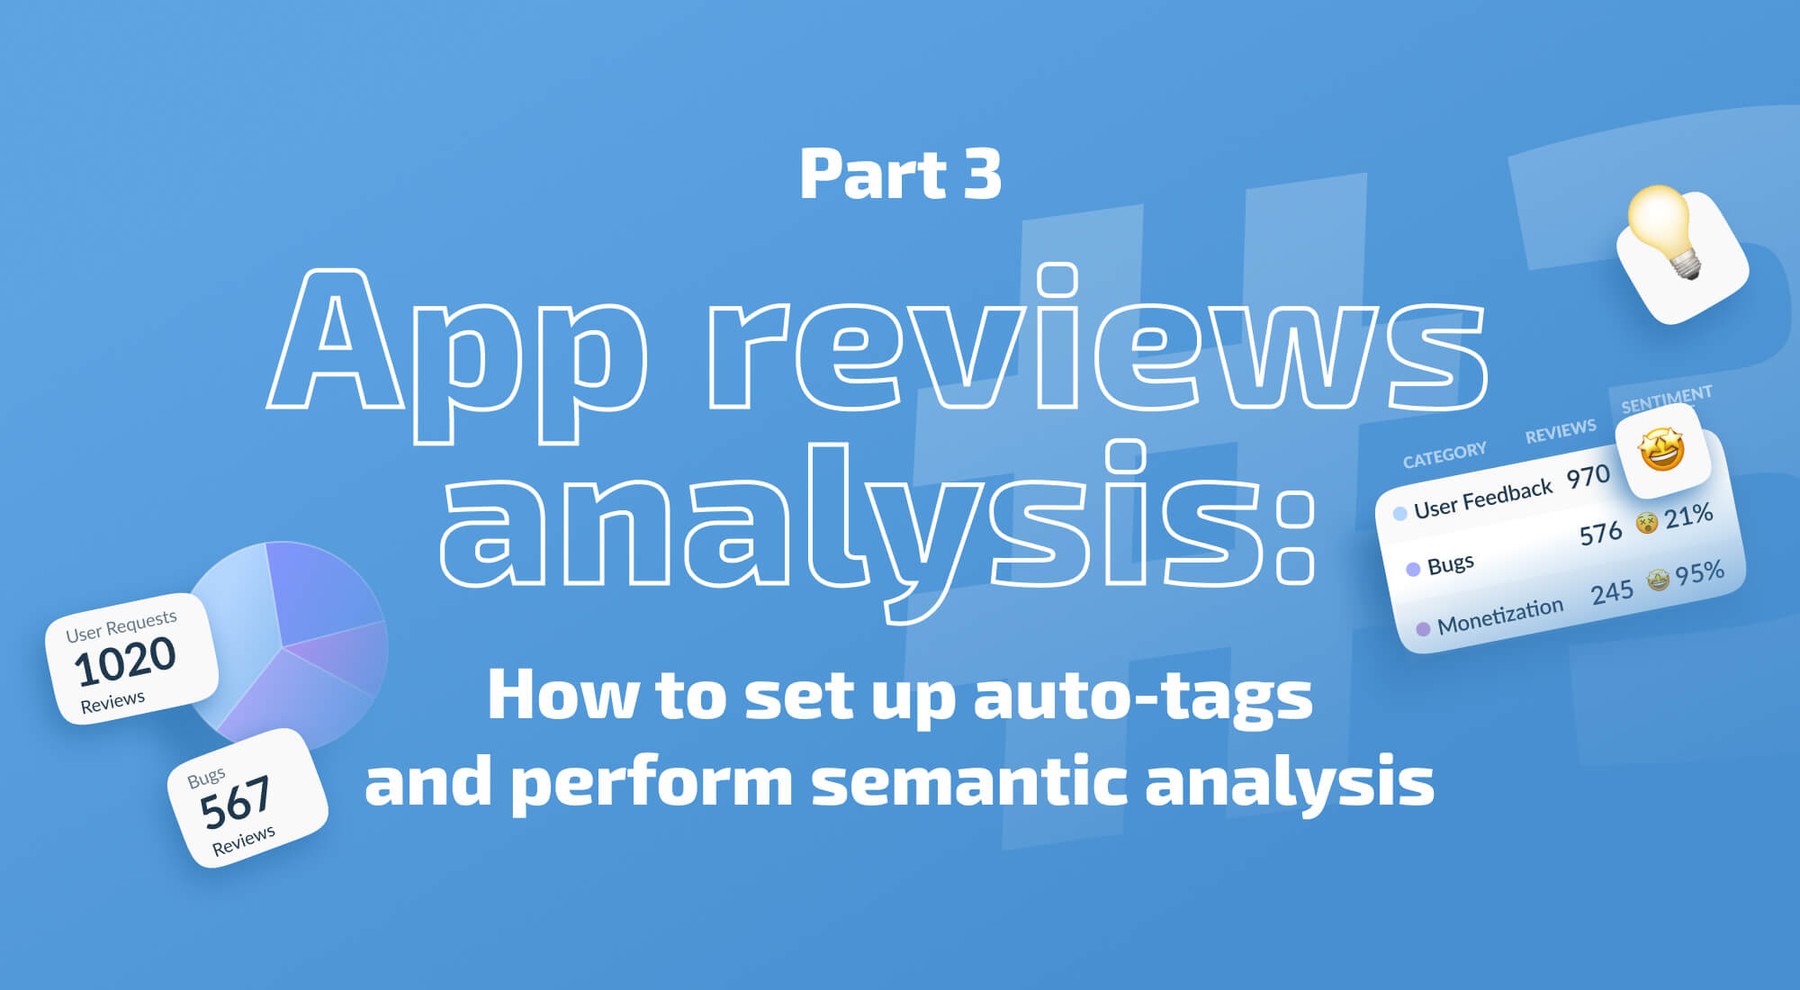 App reviews analysis: How to set up auto-tags and perform semantic analysis